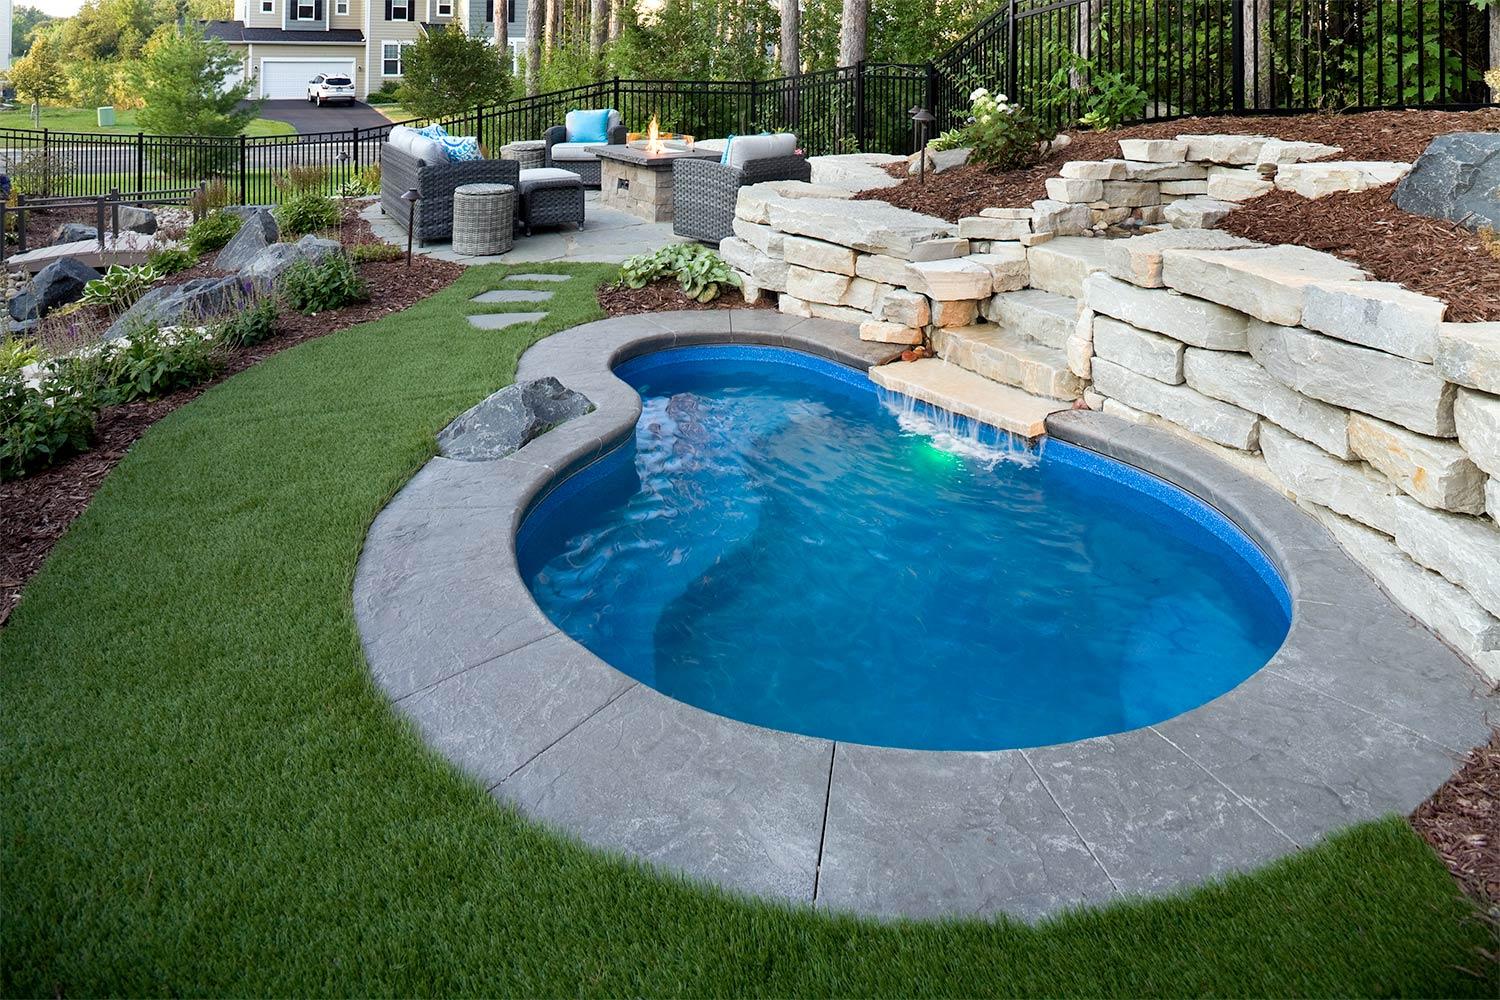 The size is another crucial factor to consider when you plan to buy a plunge pool. Measure the area where you plan to install it and make sure that the model you choose will fit comfortably within that space. You don't want to end up with a pool that's too large for your yard, or too small to meet your needs. 
Another important consideration is how you plan to use it. If you’re planning to swim laps, you'll need a model that's long enough to accommodate your strokes. If you're more interested in a pool that will provide outdoor fun for your little ones and yourself, you might need a smaller size. 
Keep in mind that the size will also impact the cost. Larger models will typically be more expensive, both in terms of the initial purchase price and ongoing maintenance costs. 